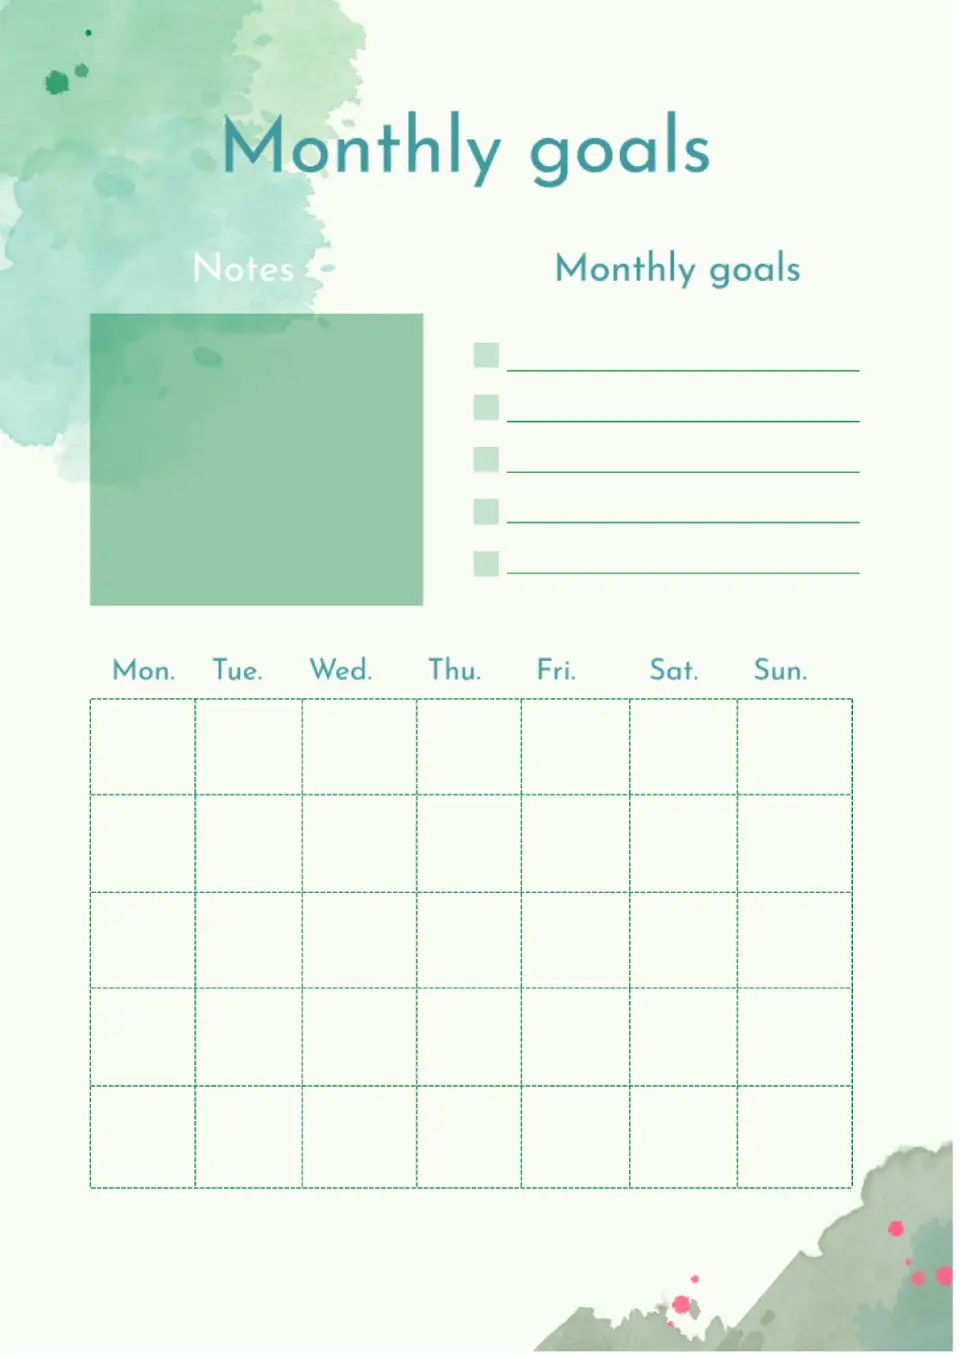 Monthly Goals Template for Google Docs